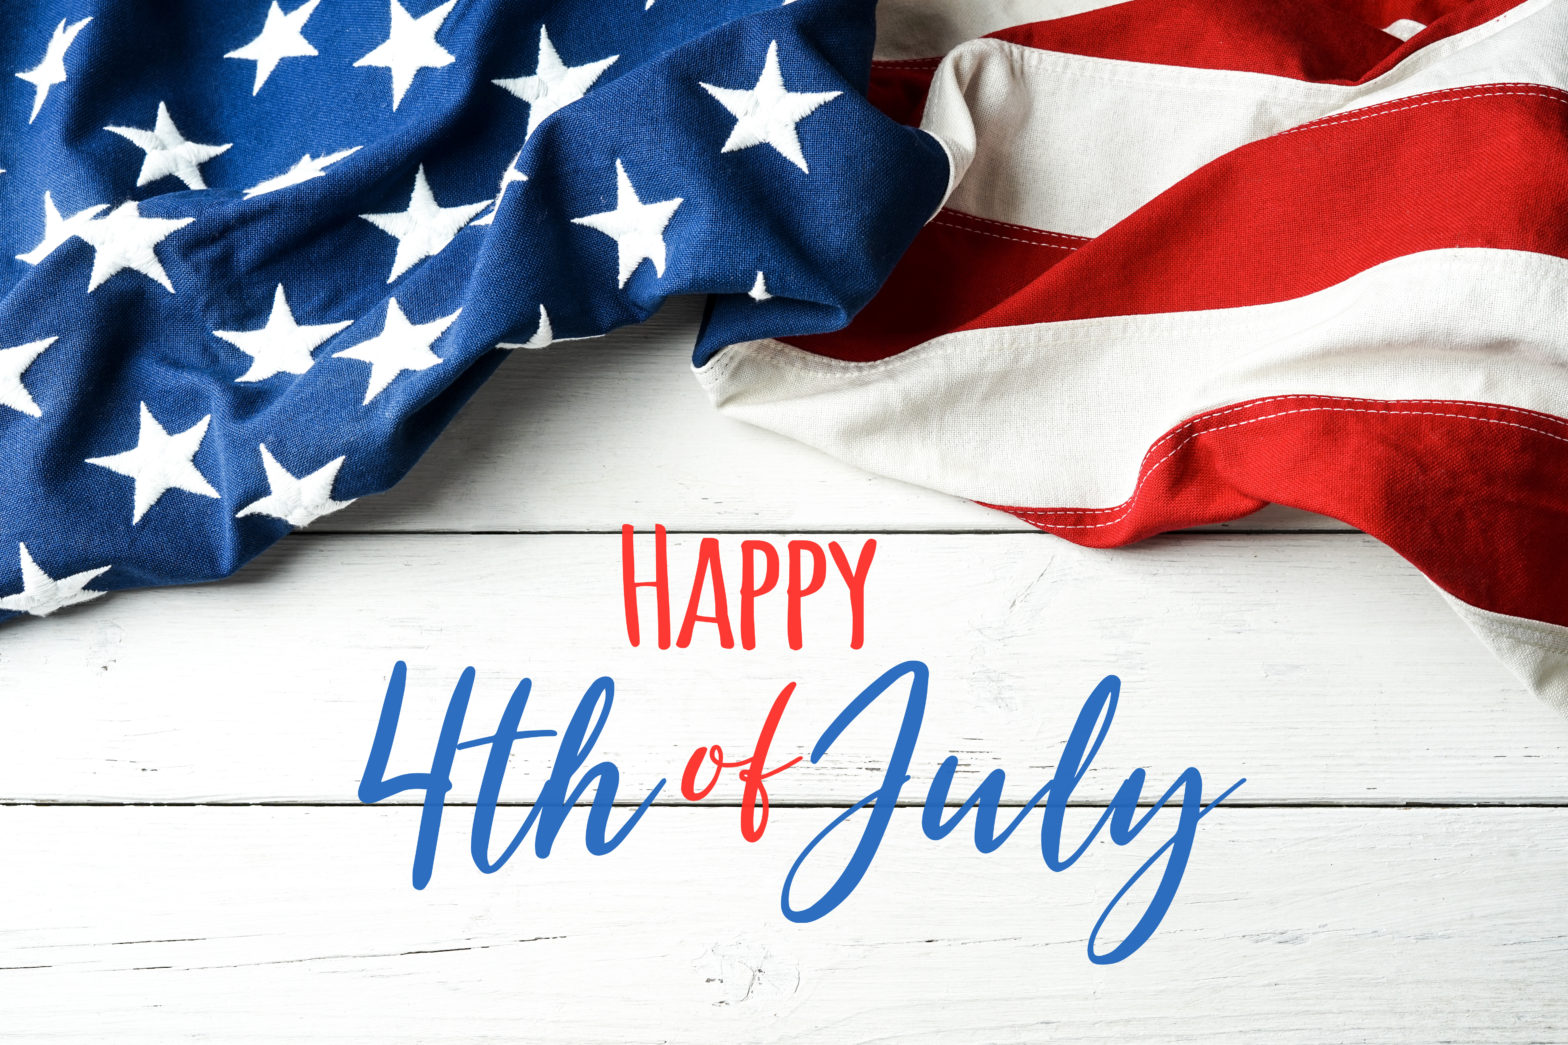 Library Closed – 4th of July